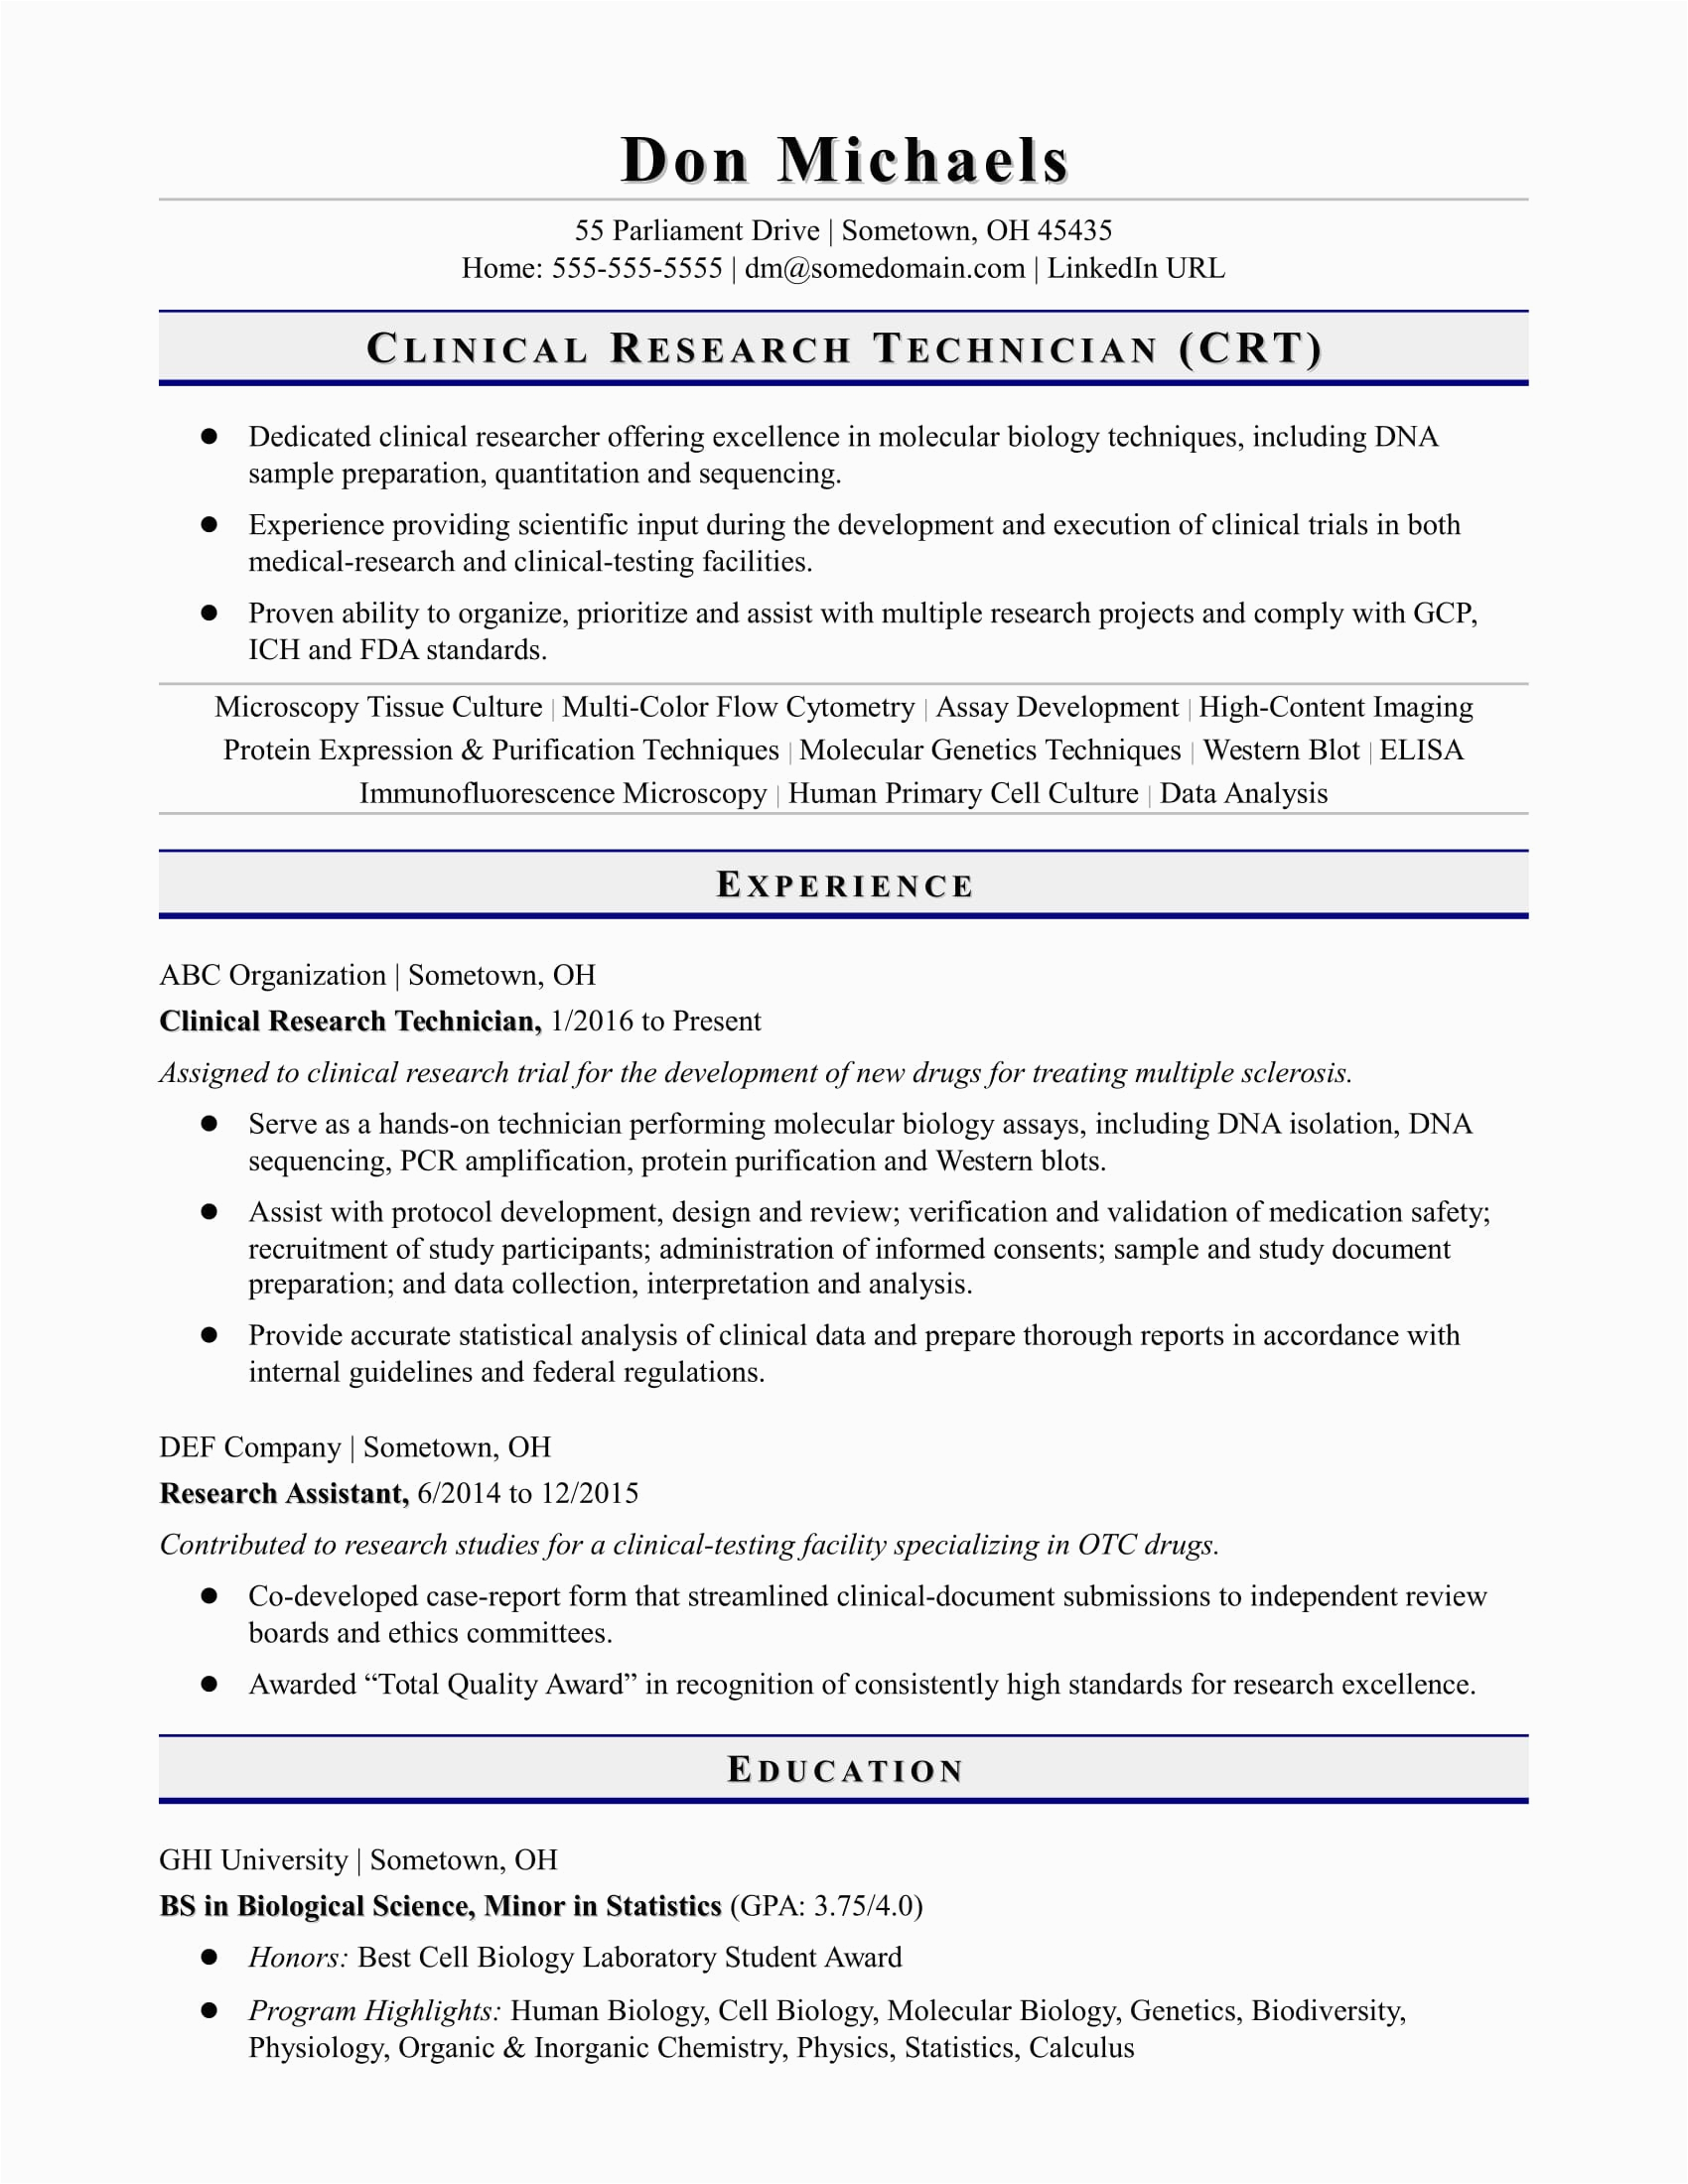 Sample Resume for Medical Lab Technician Entry Level Entry Level Research Technician Resume Sample